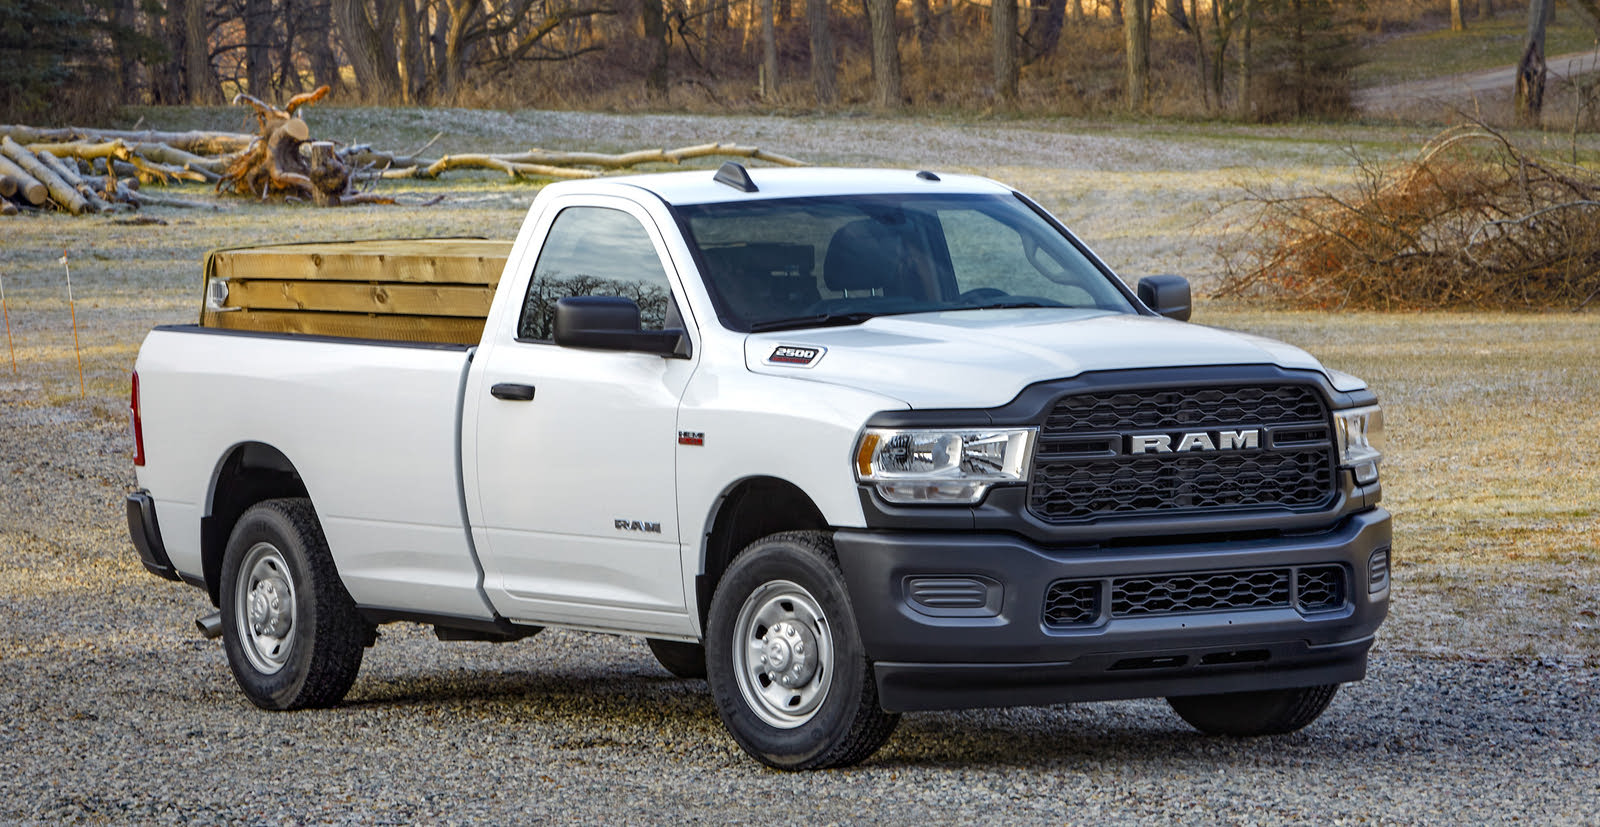 2020 RAM 2500 Test Drive Review summaryImage